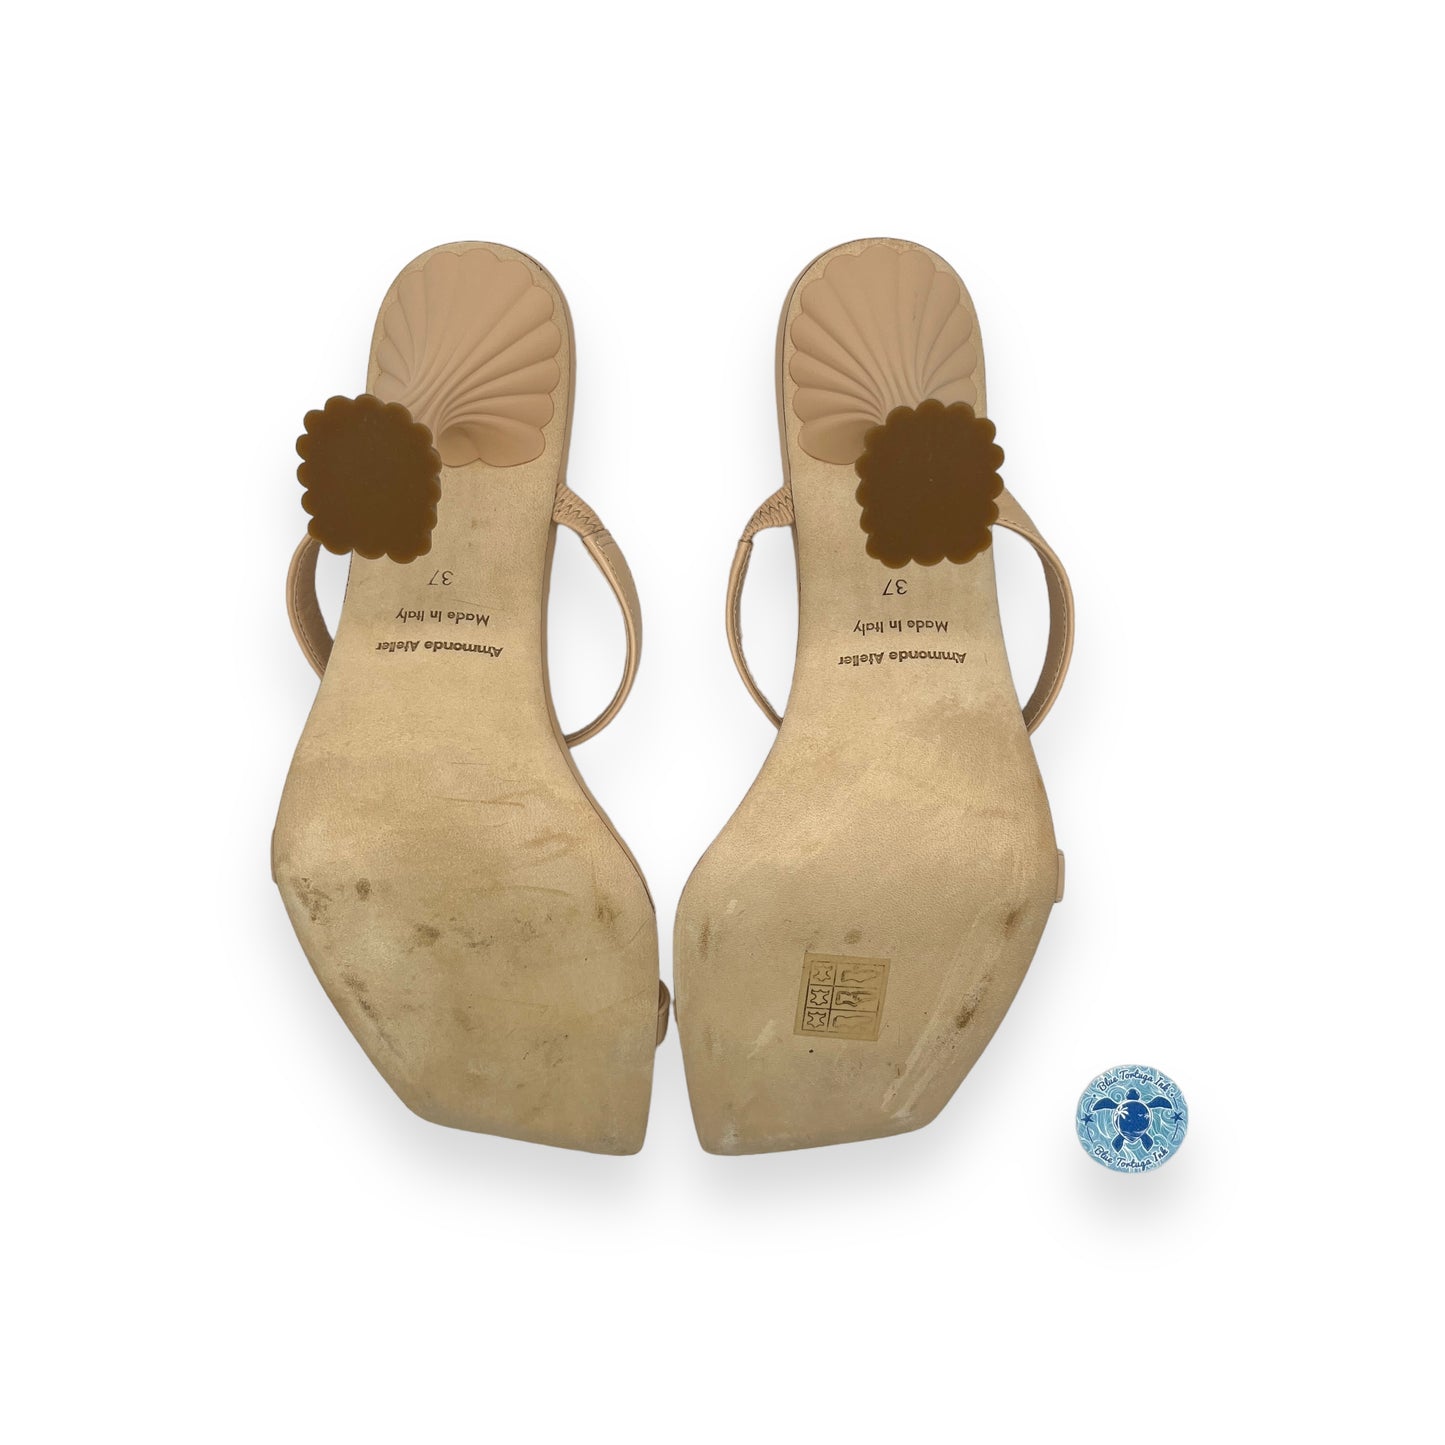 A'mmonde Atelier Andrea 100 Sandals in Nude